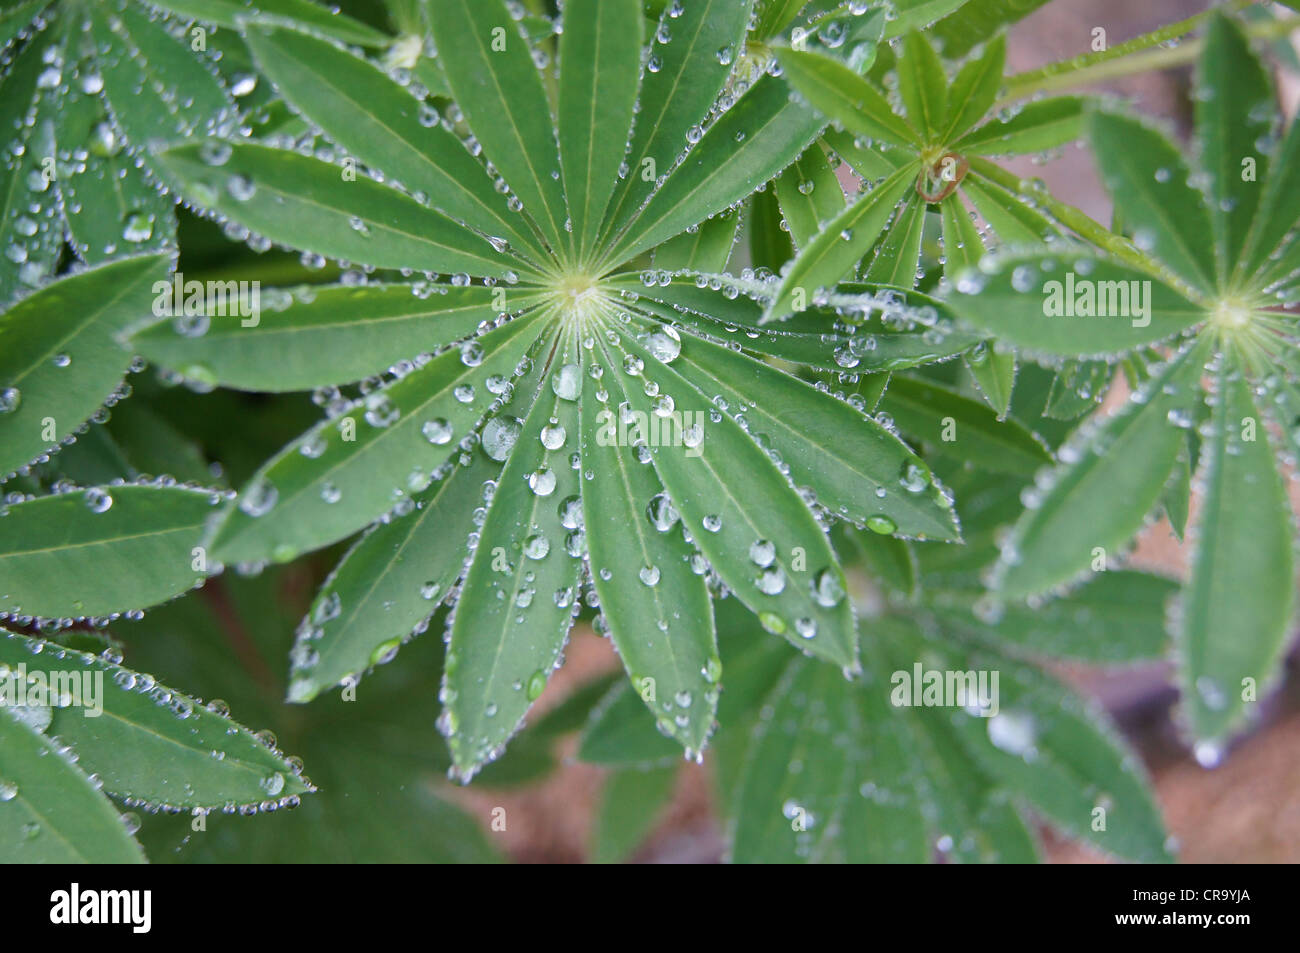 Raindrops on Lupin leaves. Taken in Hilperton, Wiltshire, UK Stock Photo